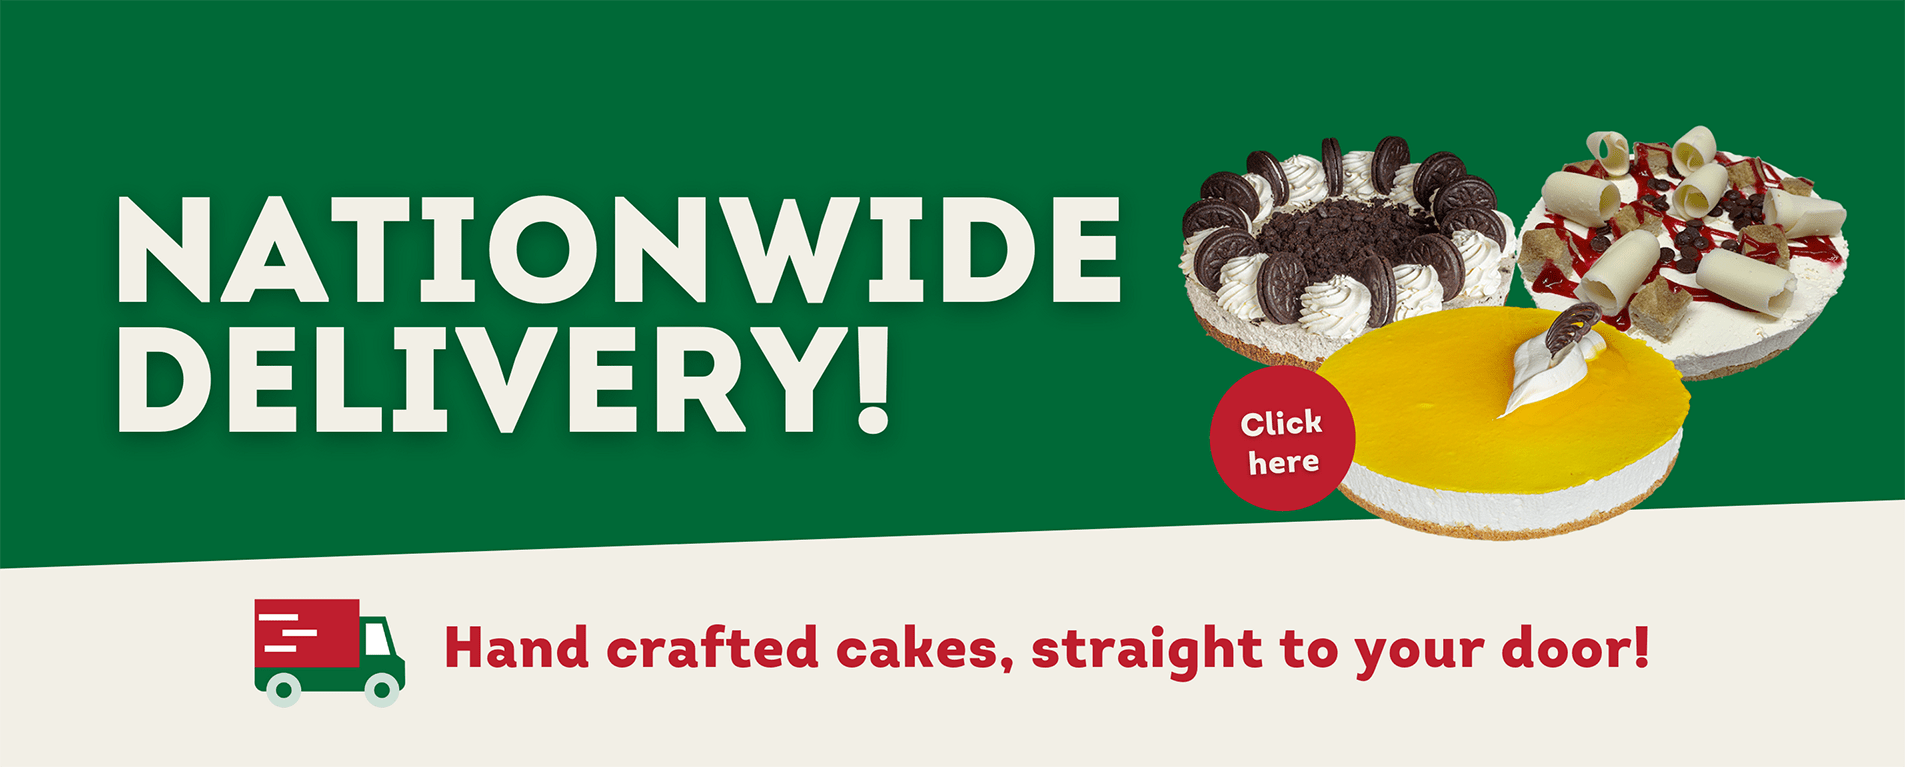 Nationwide Delivery! Hand crafted cakes straight to your door!